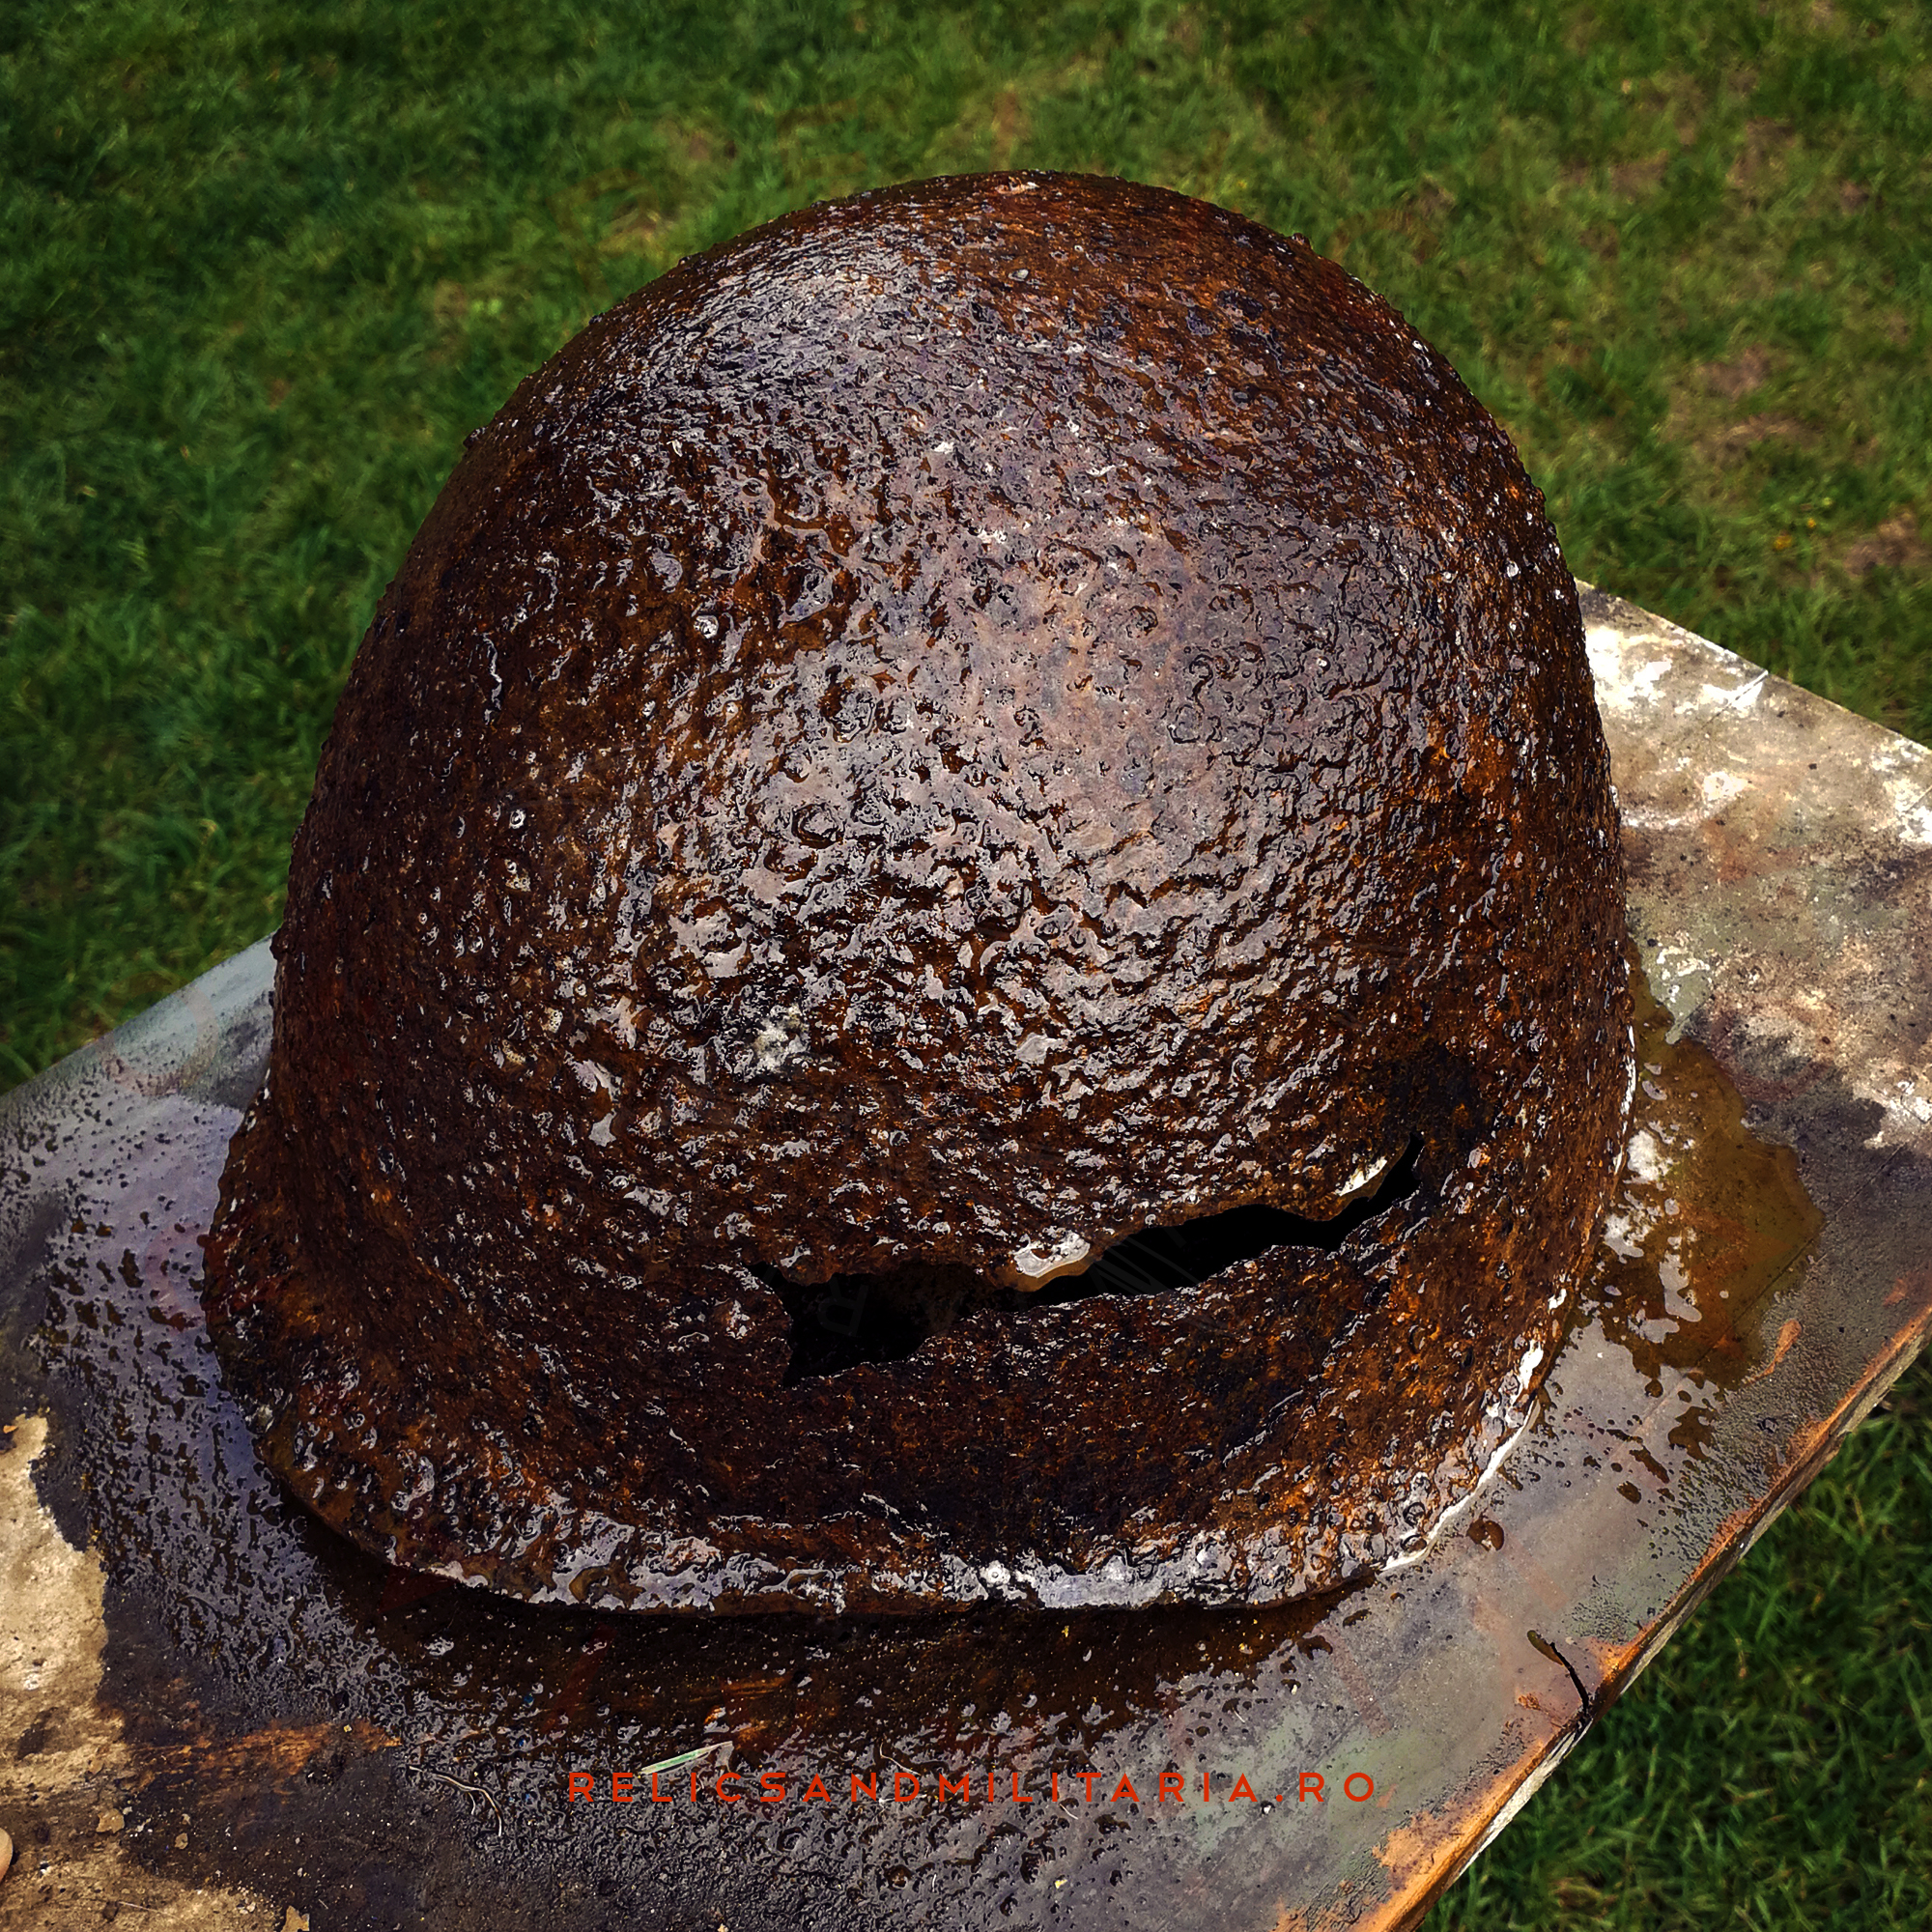 Cleaning Russian ssh-40 relic helmet found in Romania